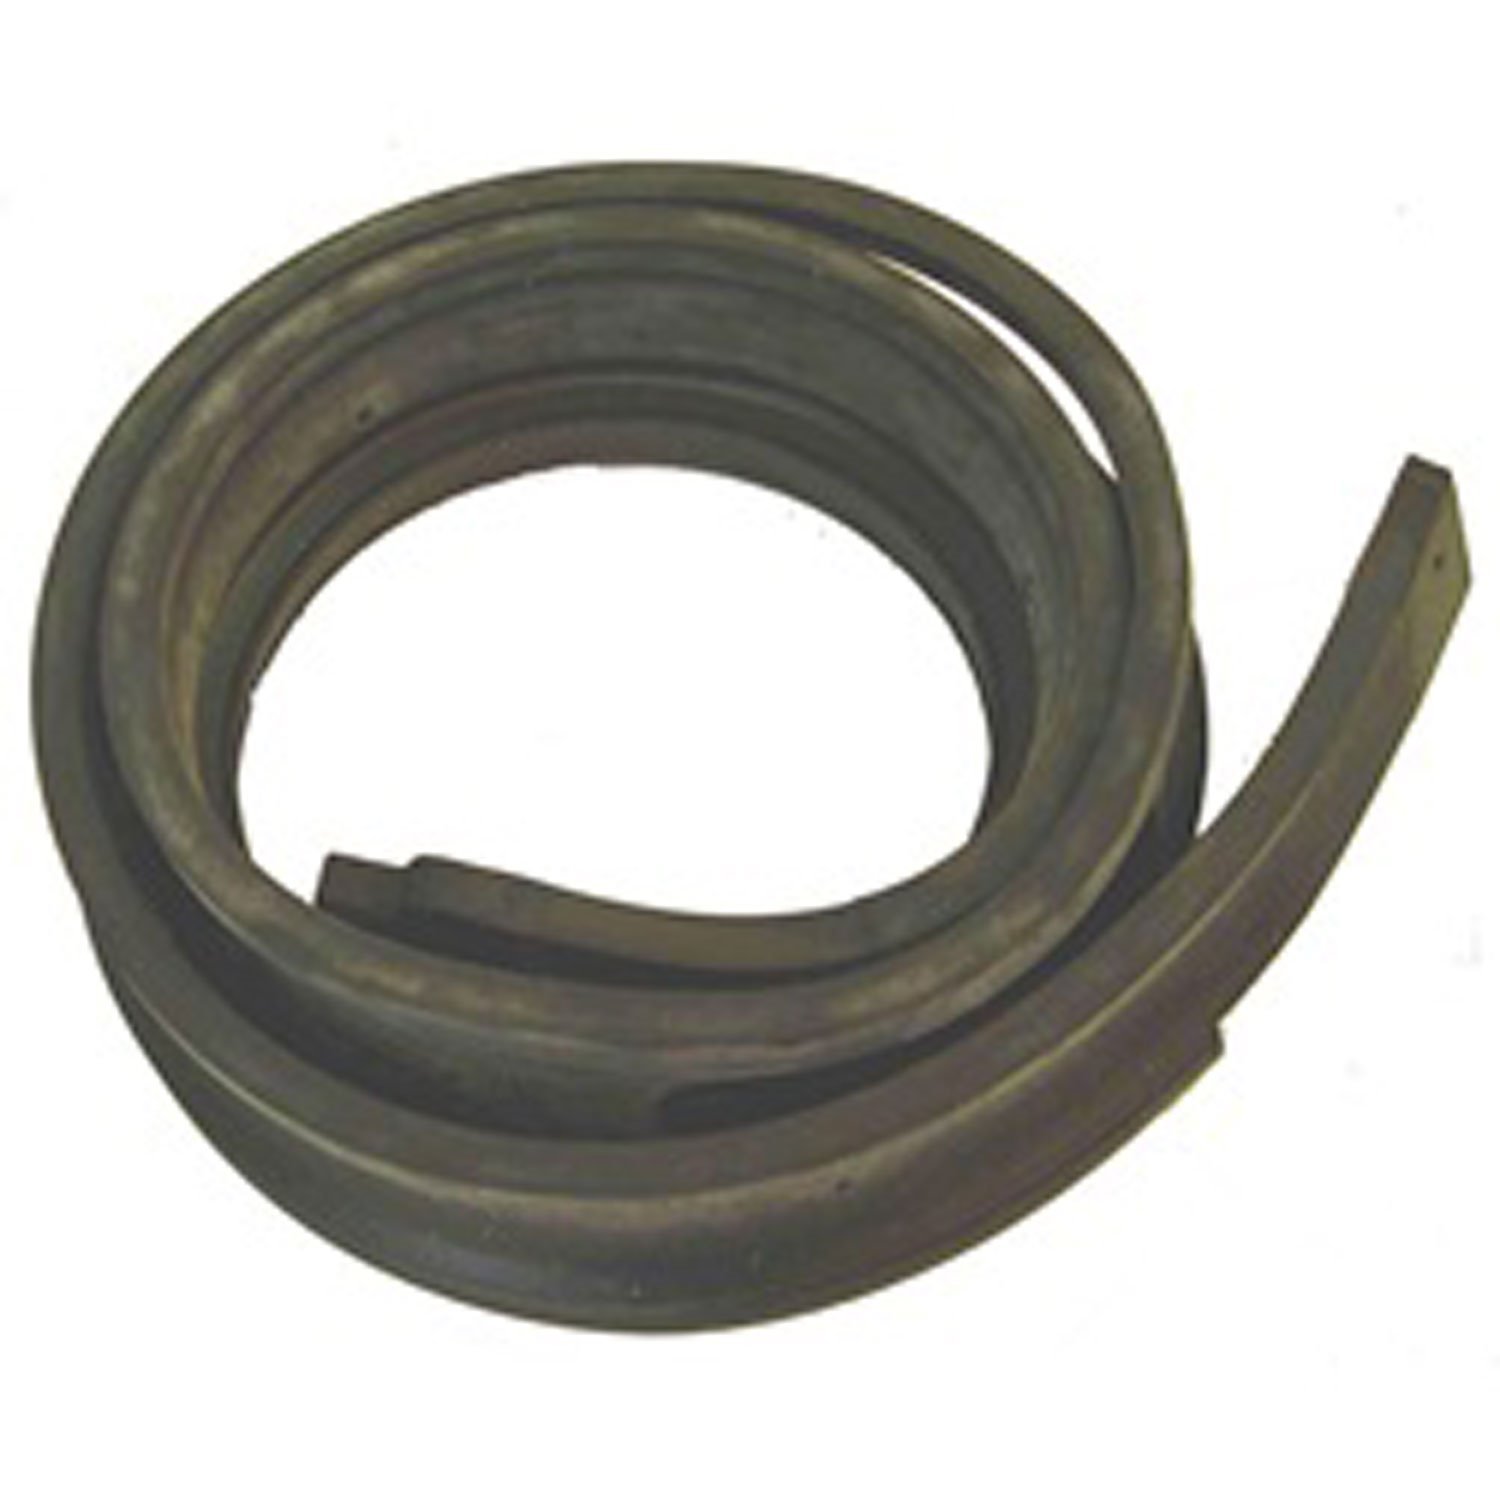 This weatherstrip seal from Omix-ADA goes between the windshield frame and the cowl. Fits 76-86 Jeep CJ models.